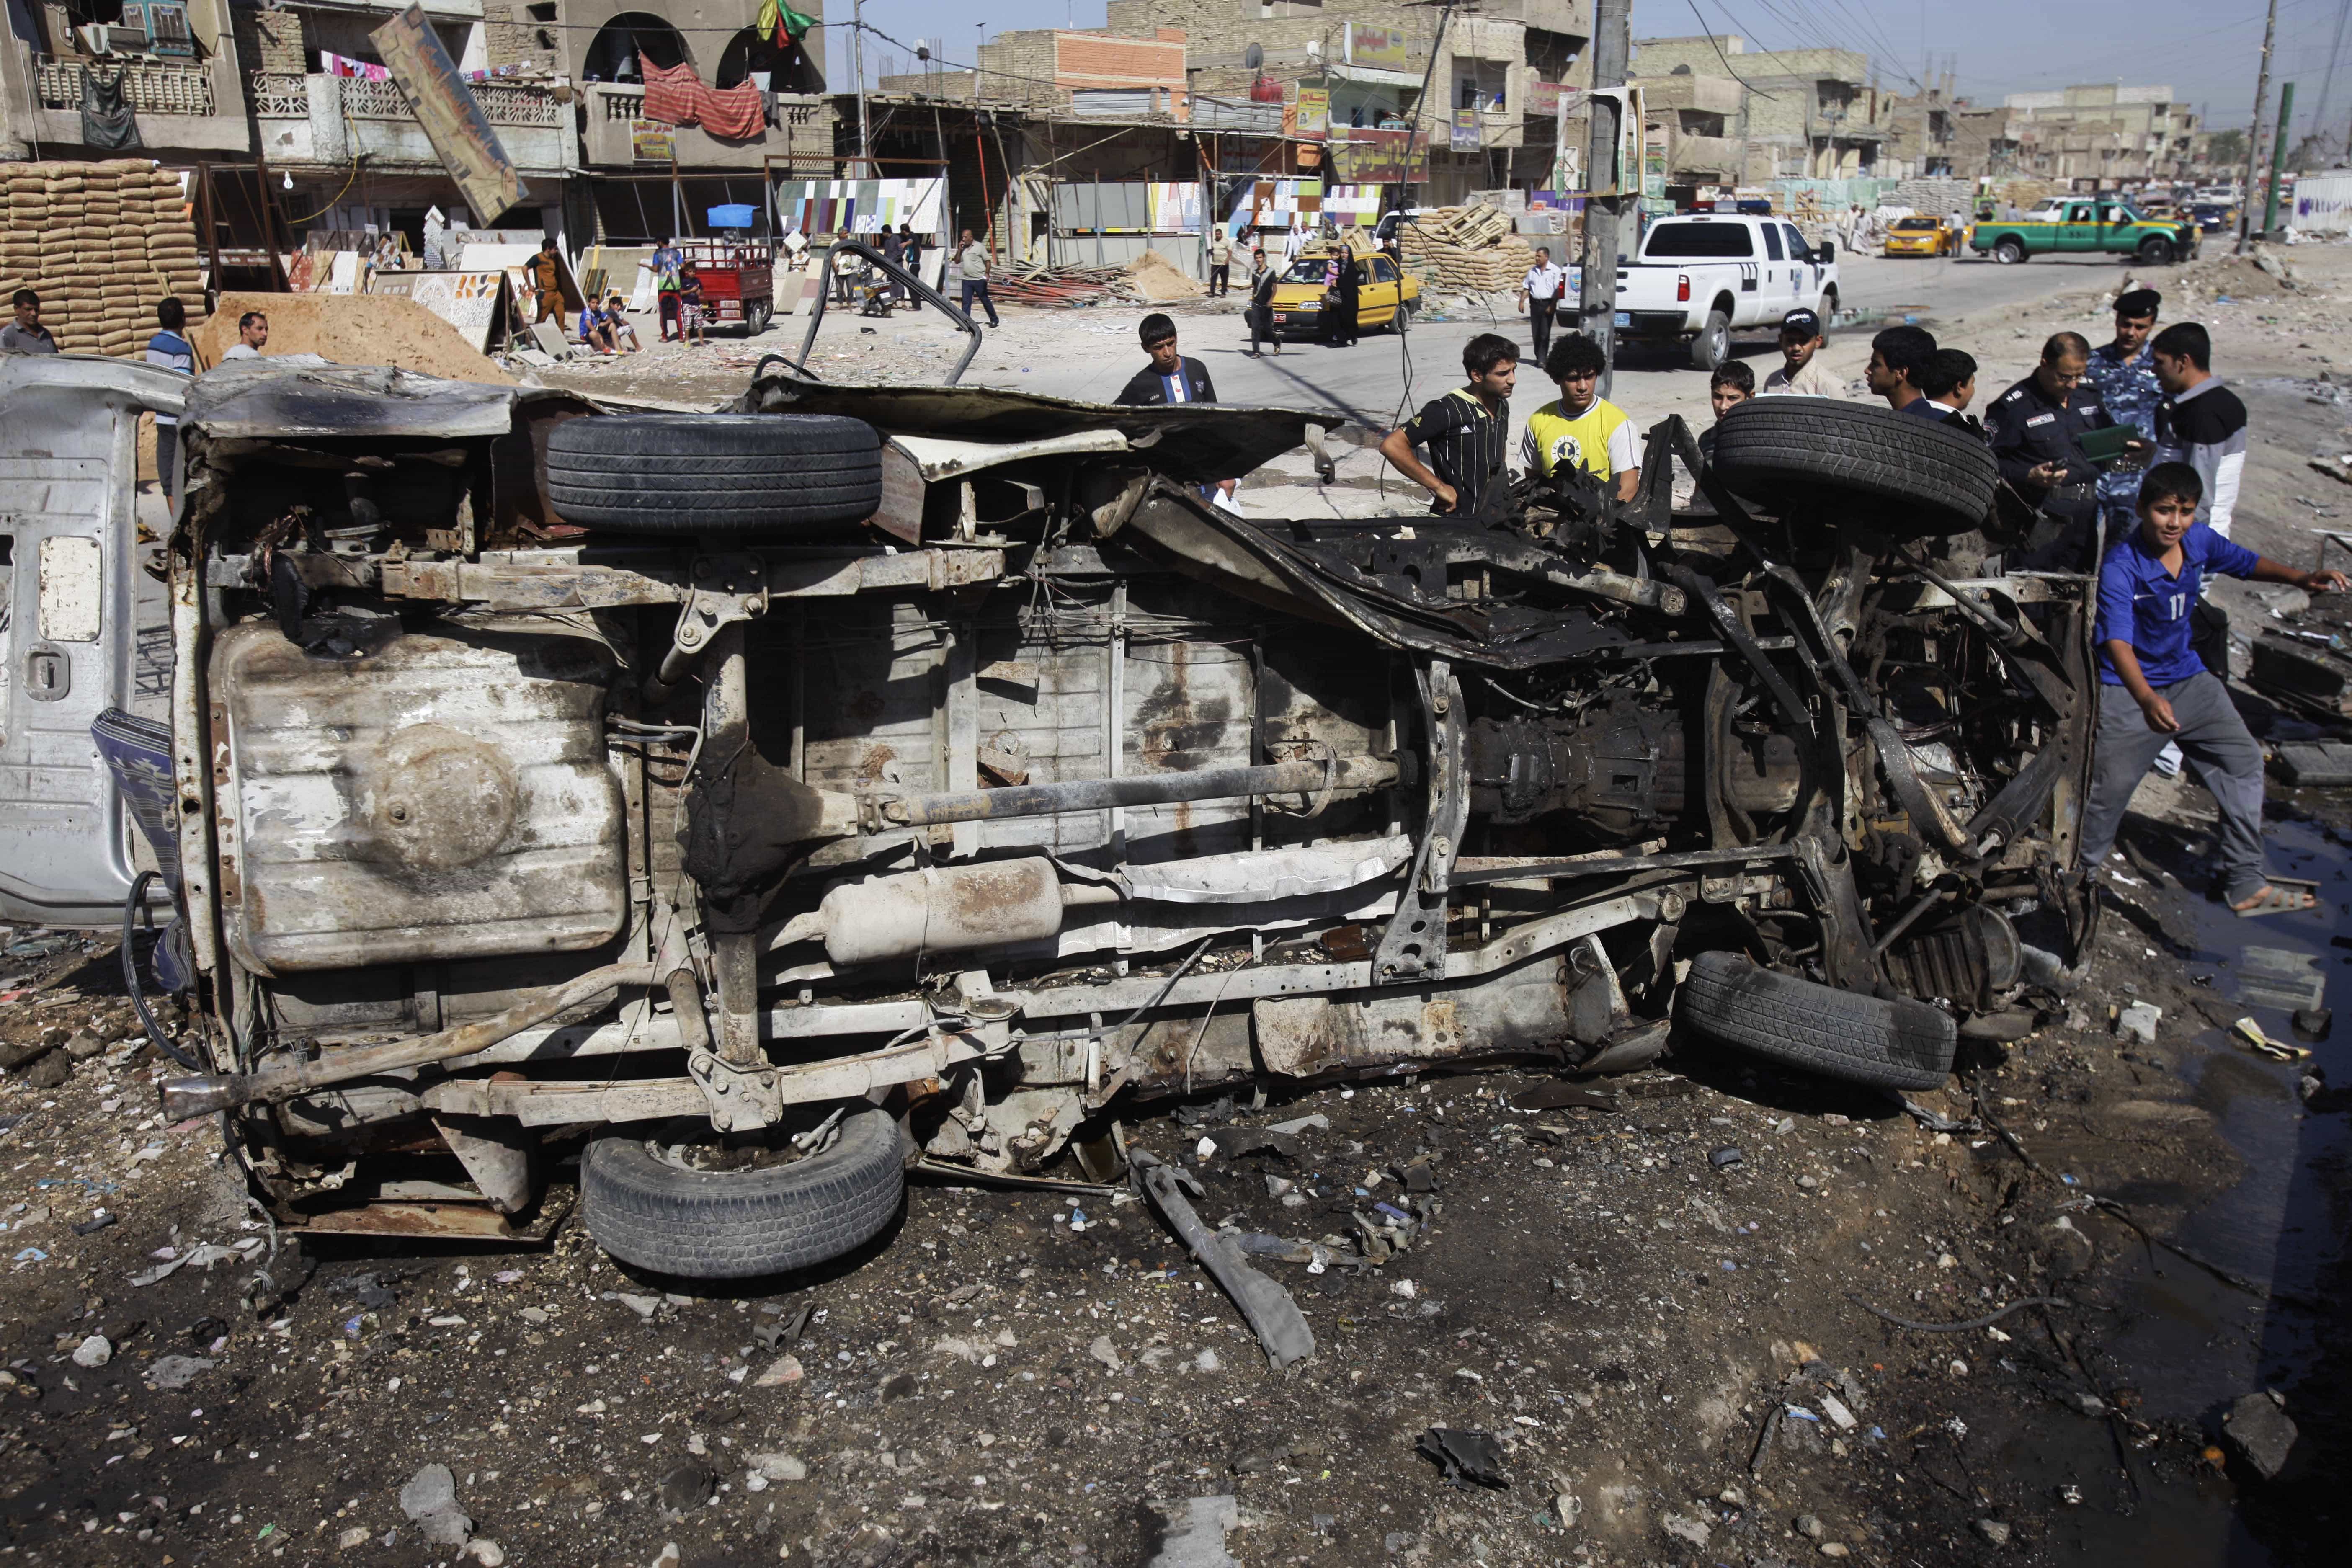 Car bomb attacks in Baghdad are becoming increasingly prevalent leading Iraqis to protest the country's continuing slide into violence, AP Photo/Karim Kadim